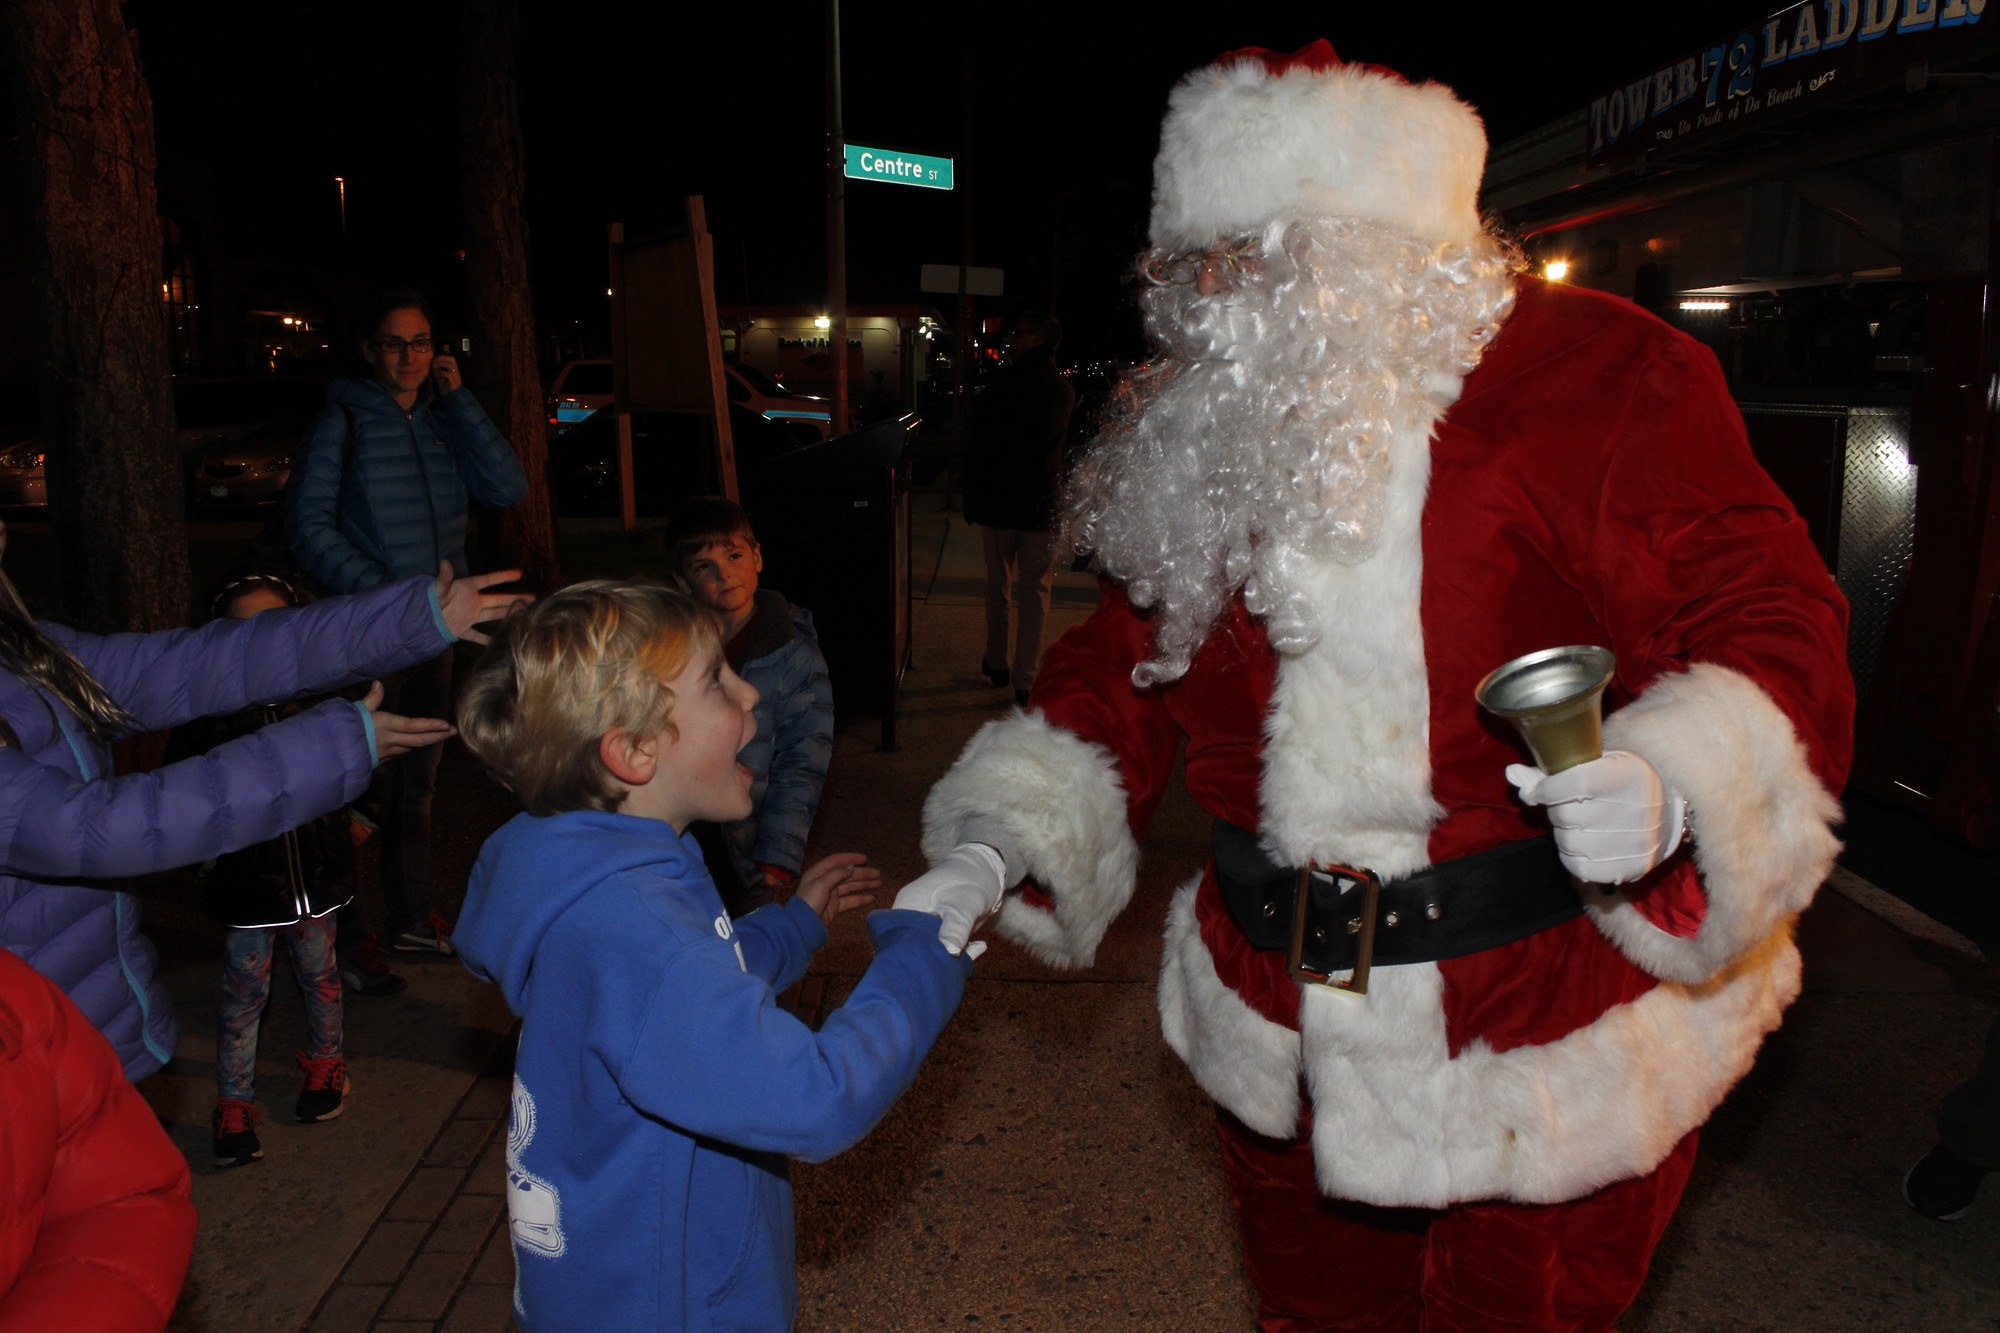 Archie Lithgow was the first person to shake Santa’s hand as he stepped off the fire truck at last week's tree lighting.